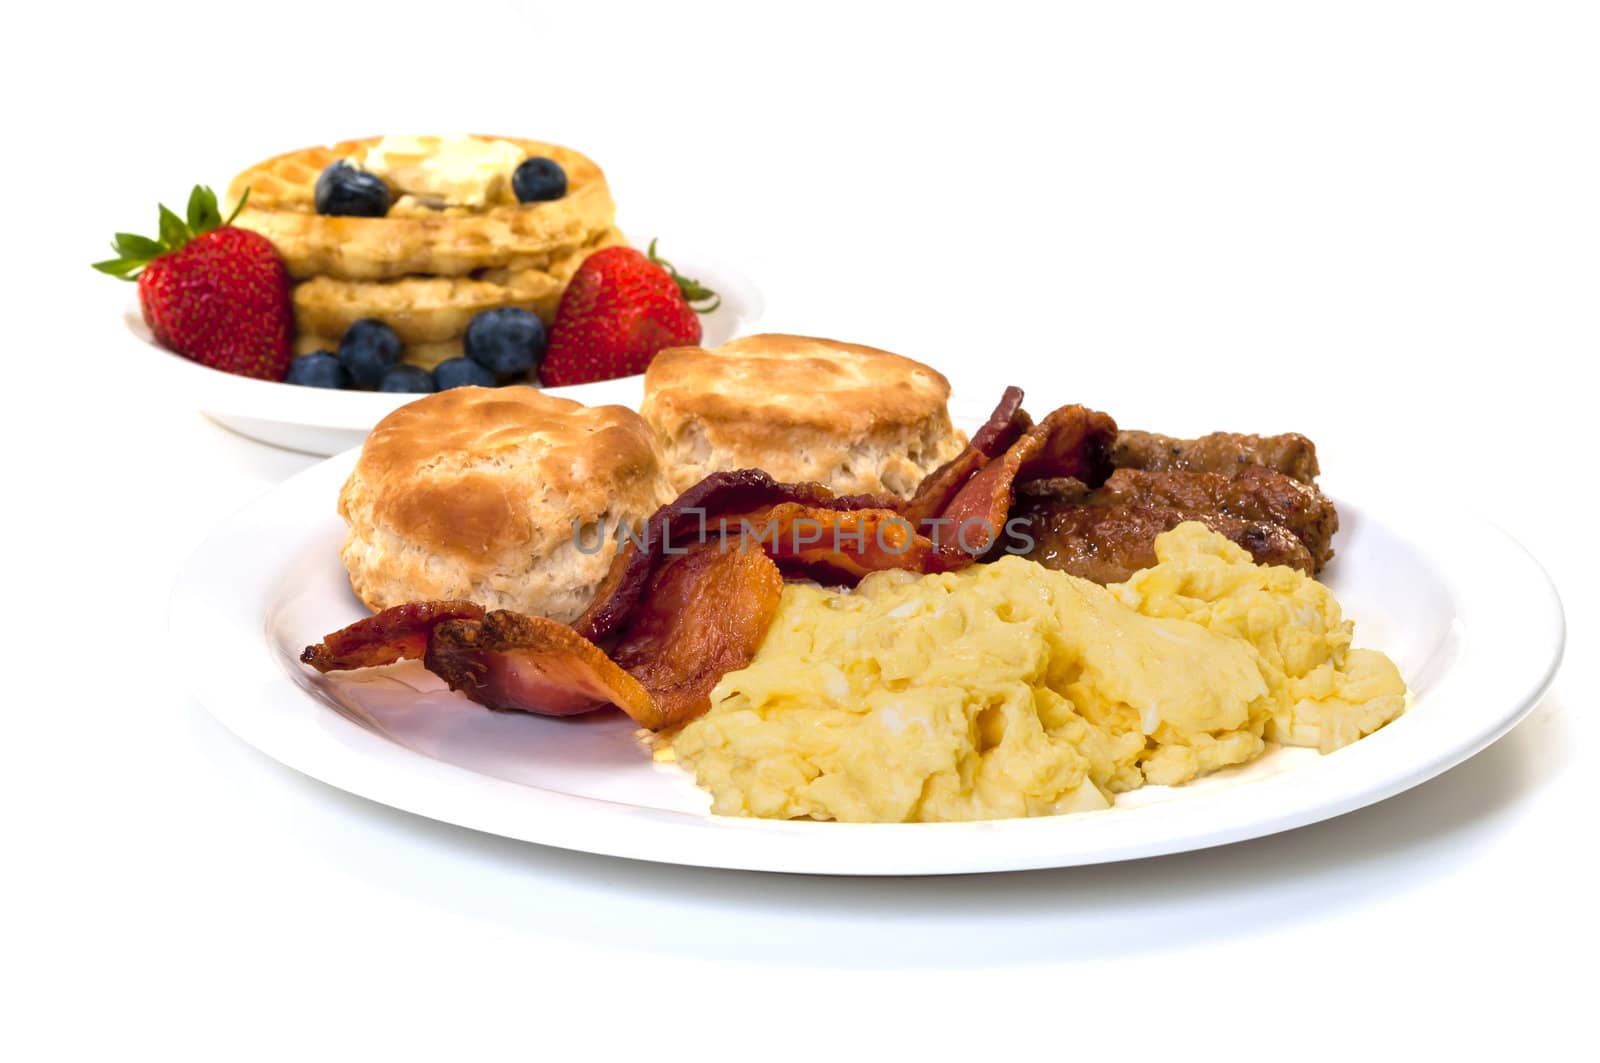 Breakfast with Eggs, Bacon , Sausage, Biscuits  and Waffles by dehooks